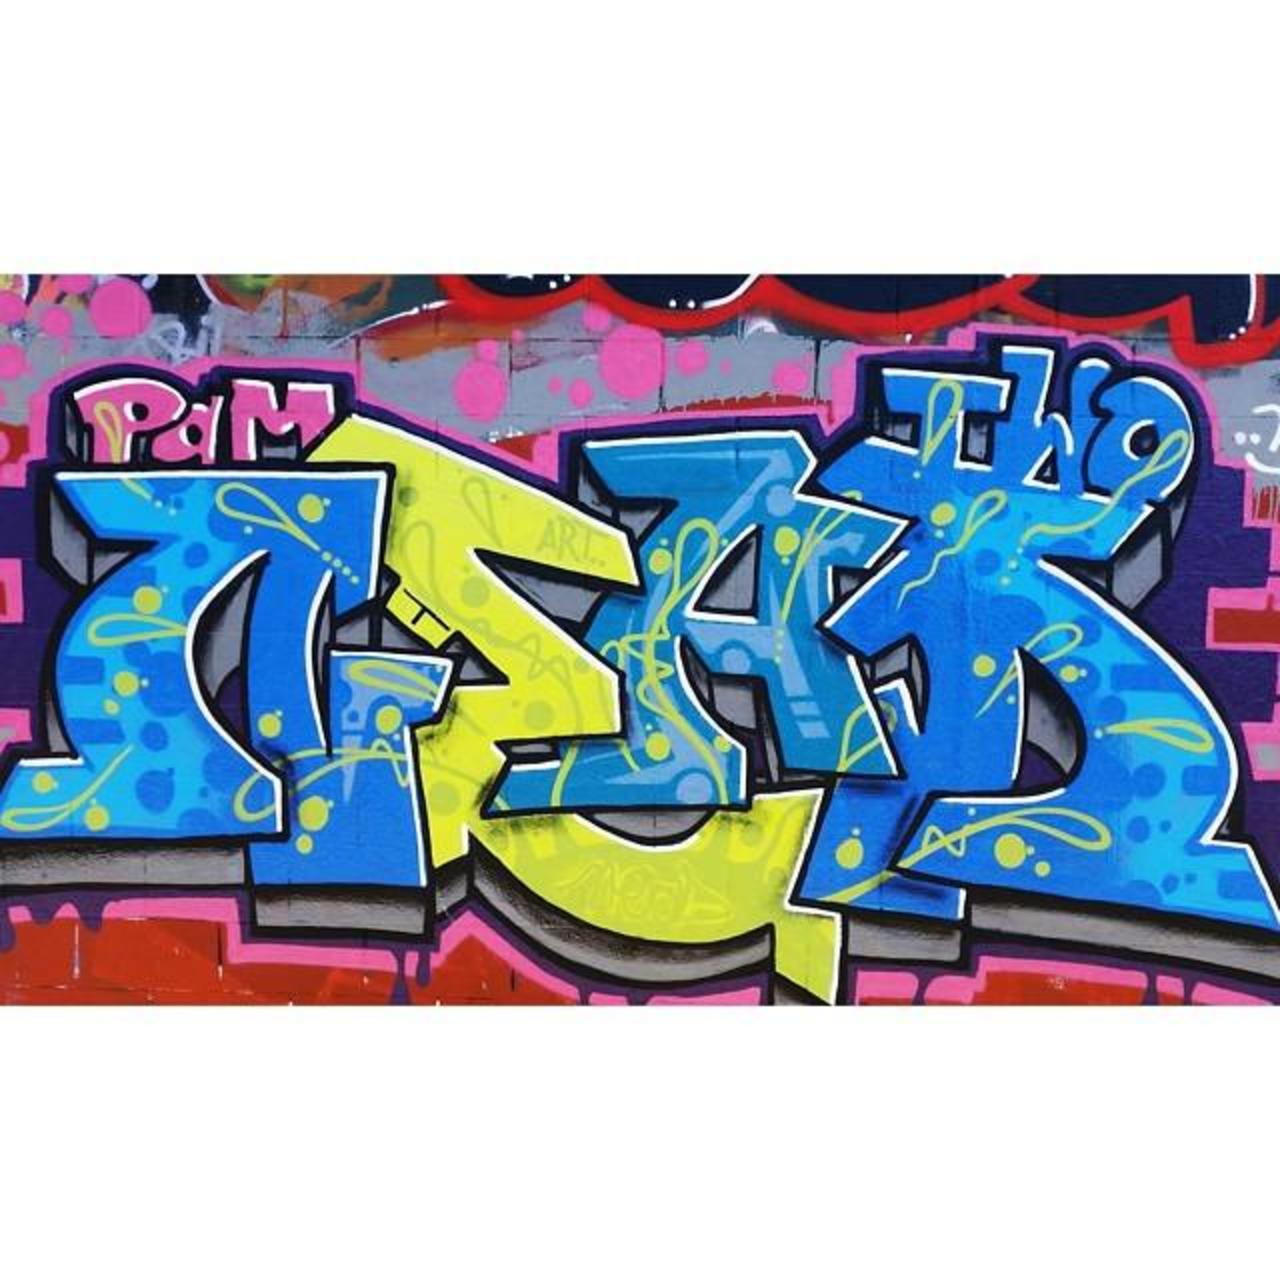 #art #graffiti #graff #colors #paint #spraypaint #street #beverly by the_beverly_wall #LCSNY http://t.co/eDAJ09Cyea